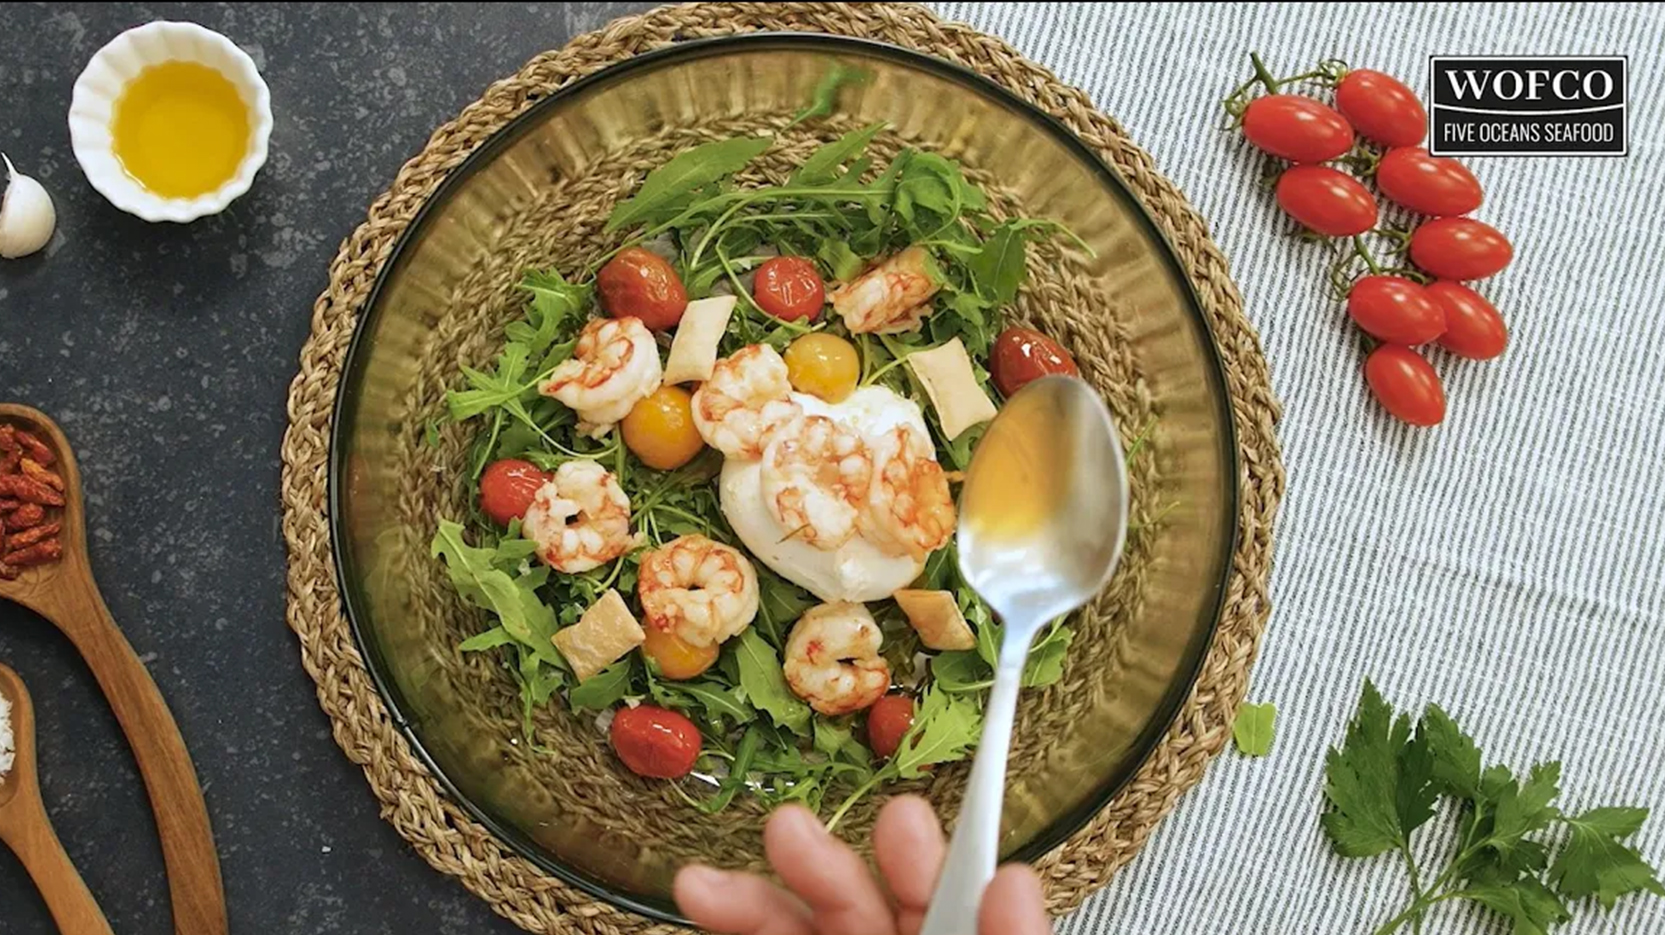 Warm salad with garlic argentine red shrimps, burrata and cherry tomatoes